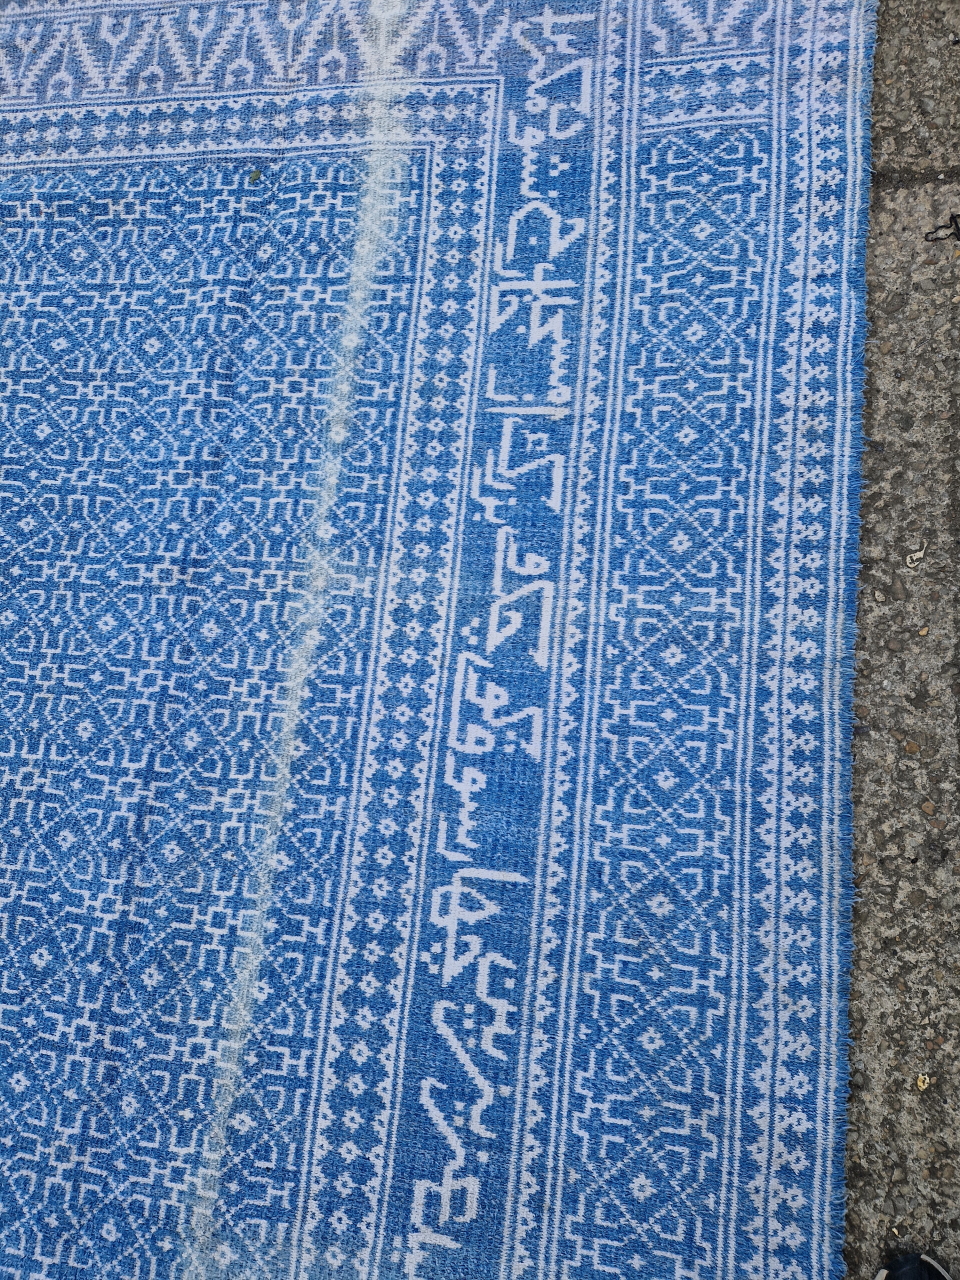 AN UNUSUAL PERSIAN FLAT WOVEN CARPET WITH INSCRIPTIONS 425 x 292 cm - Image 6 of 8